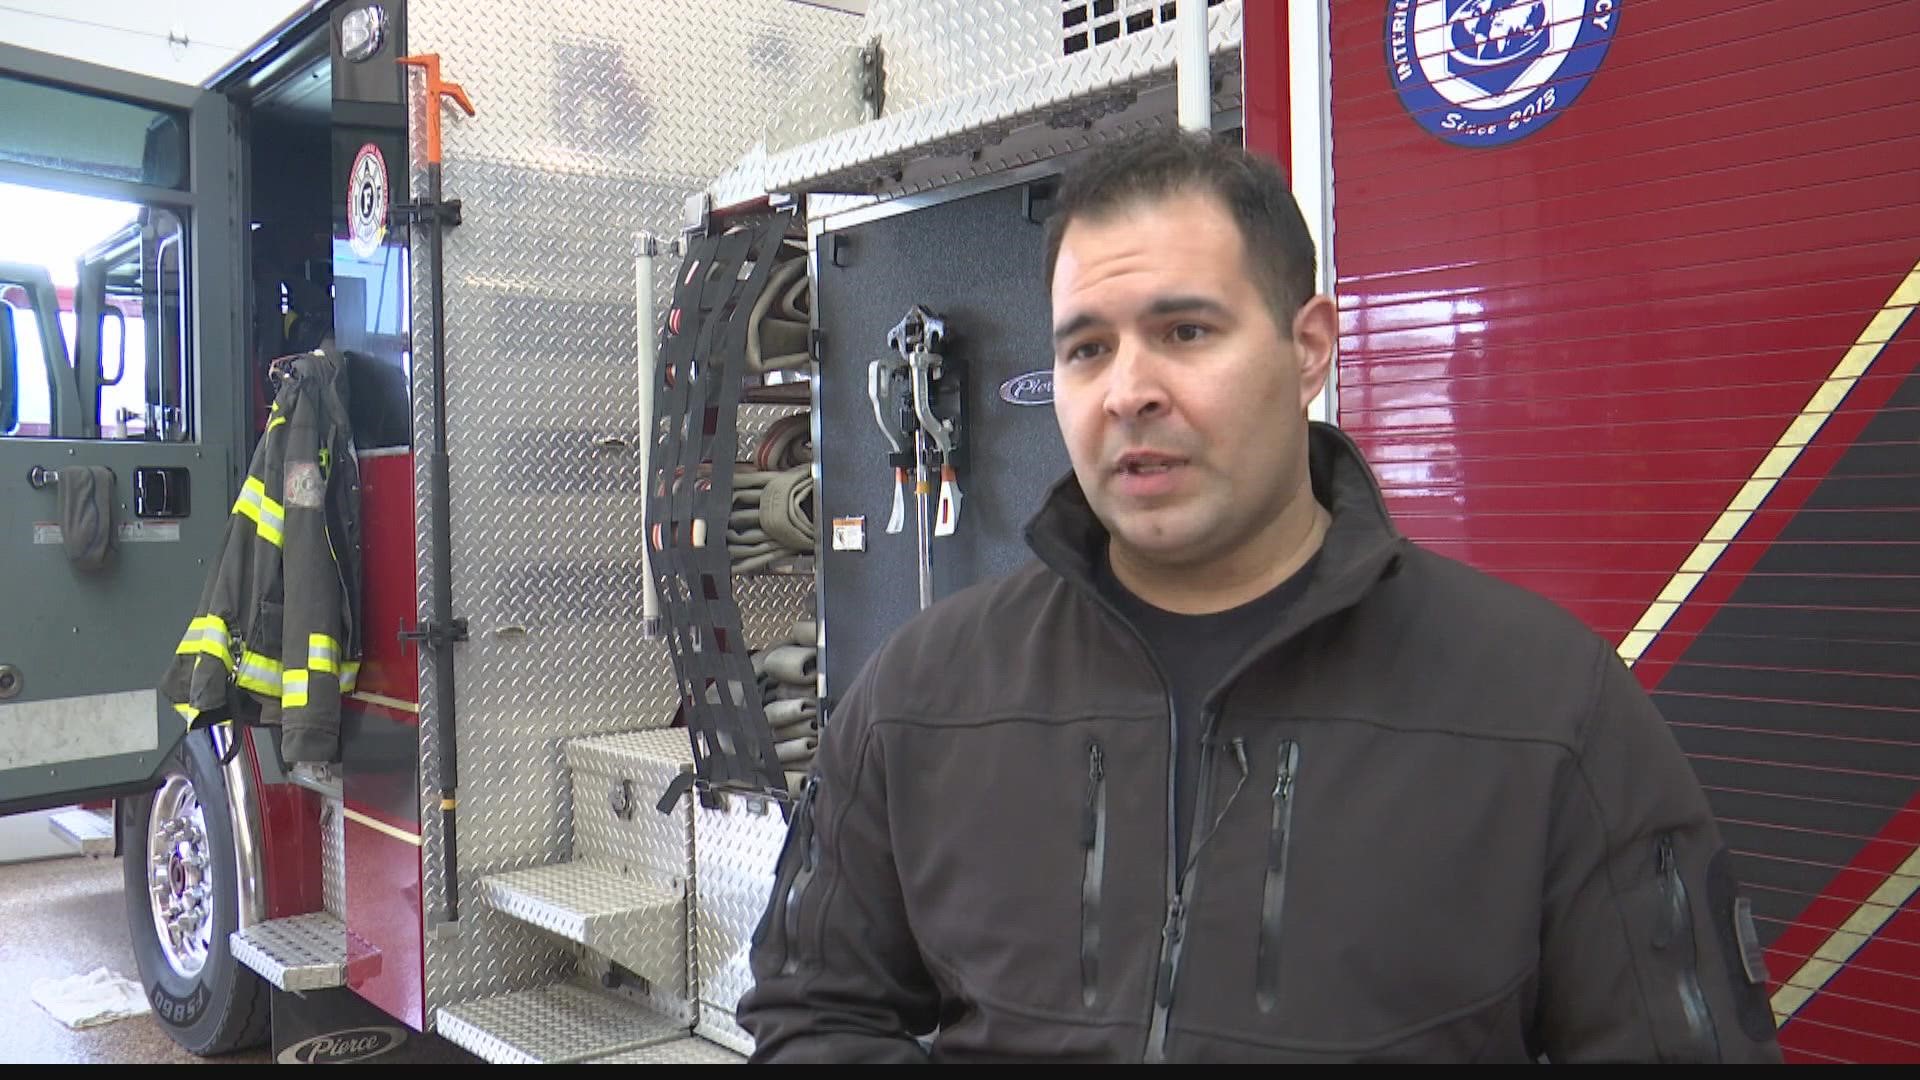 Carmel firefighters welcomed a second baby in their Safe Haven baby box this month.